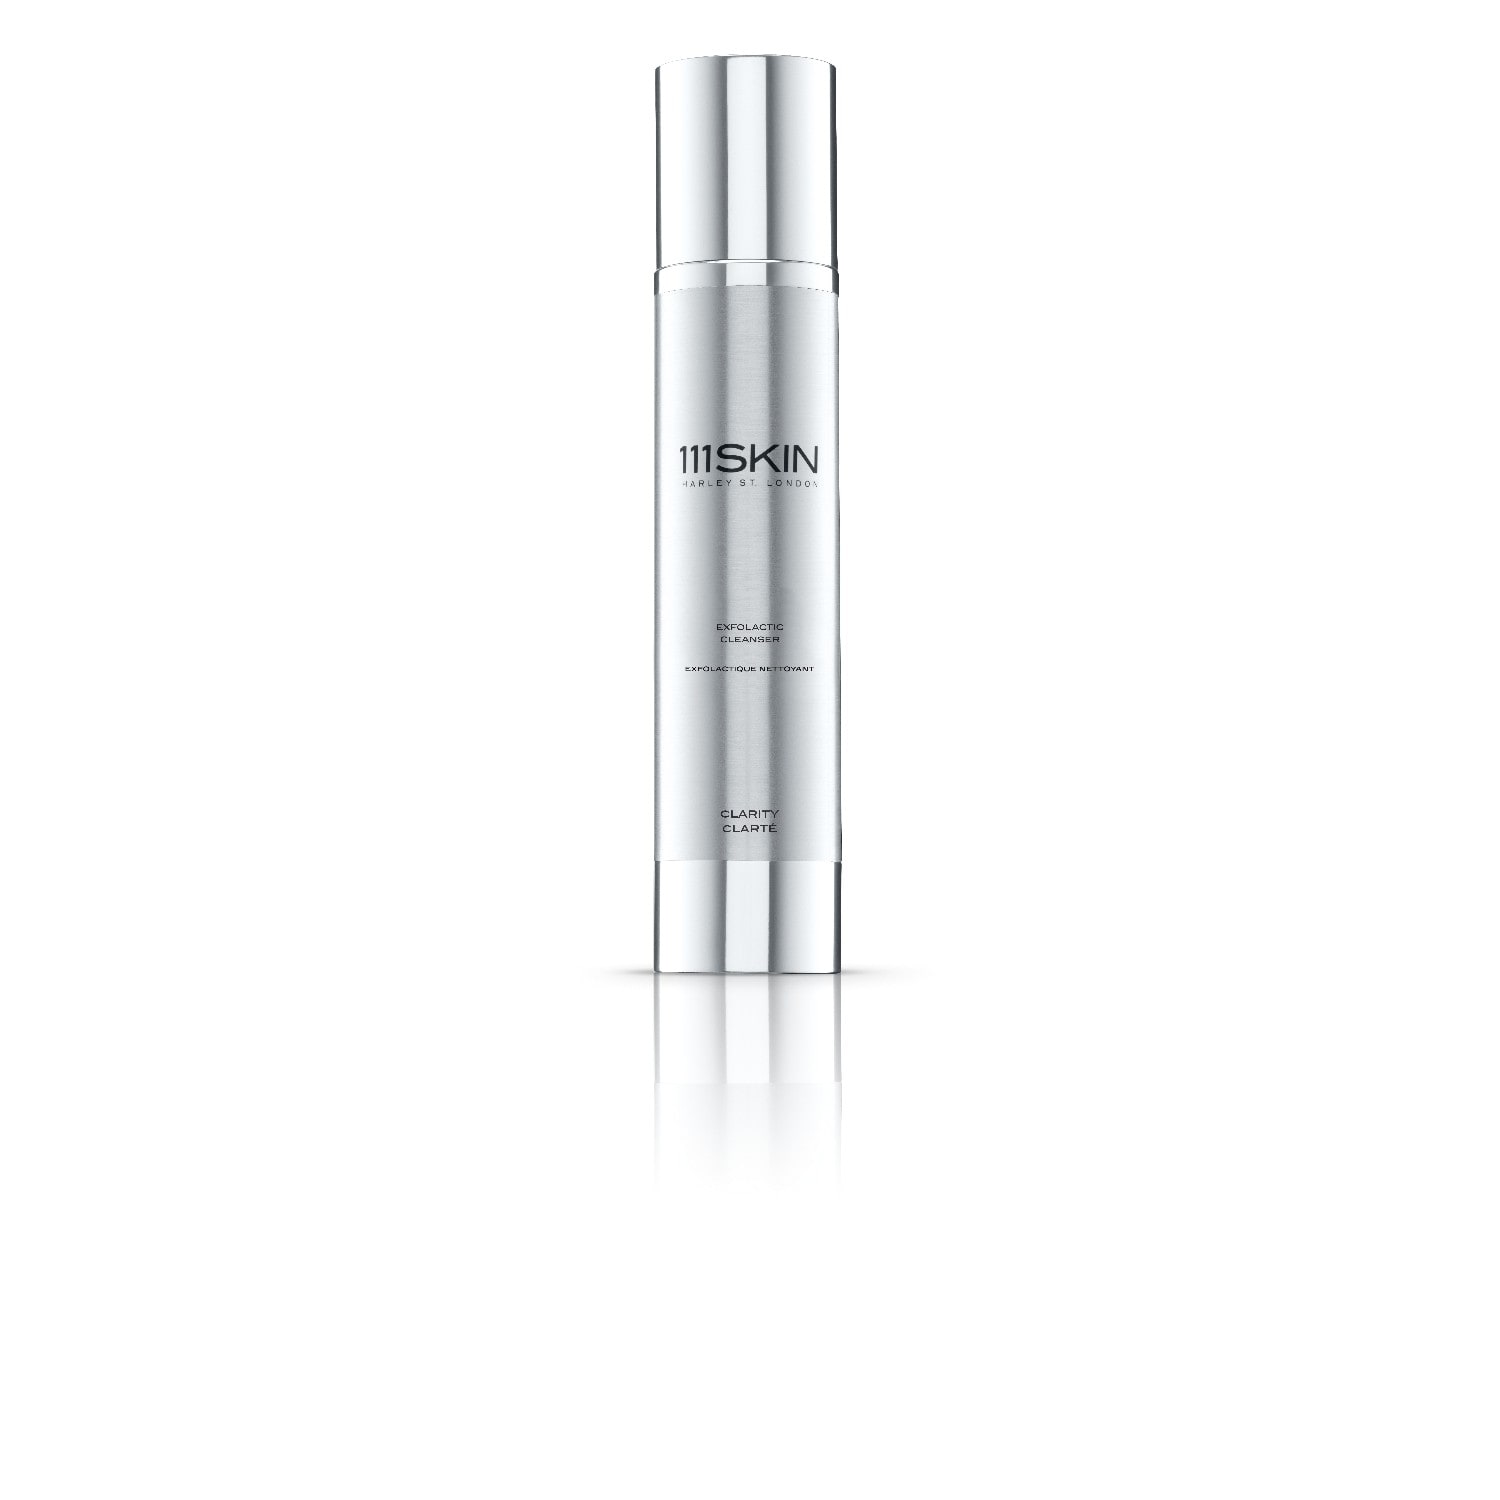 111Skin Clarity Exfolactic Cleanser